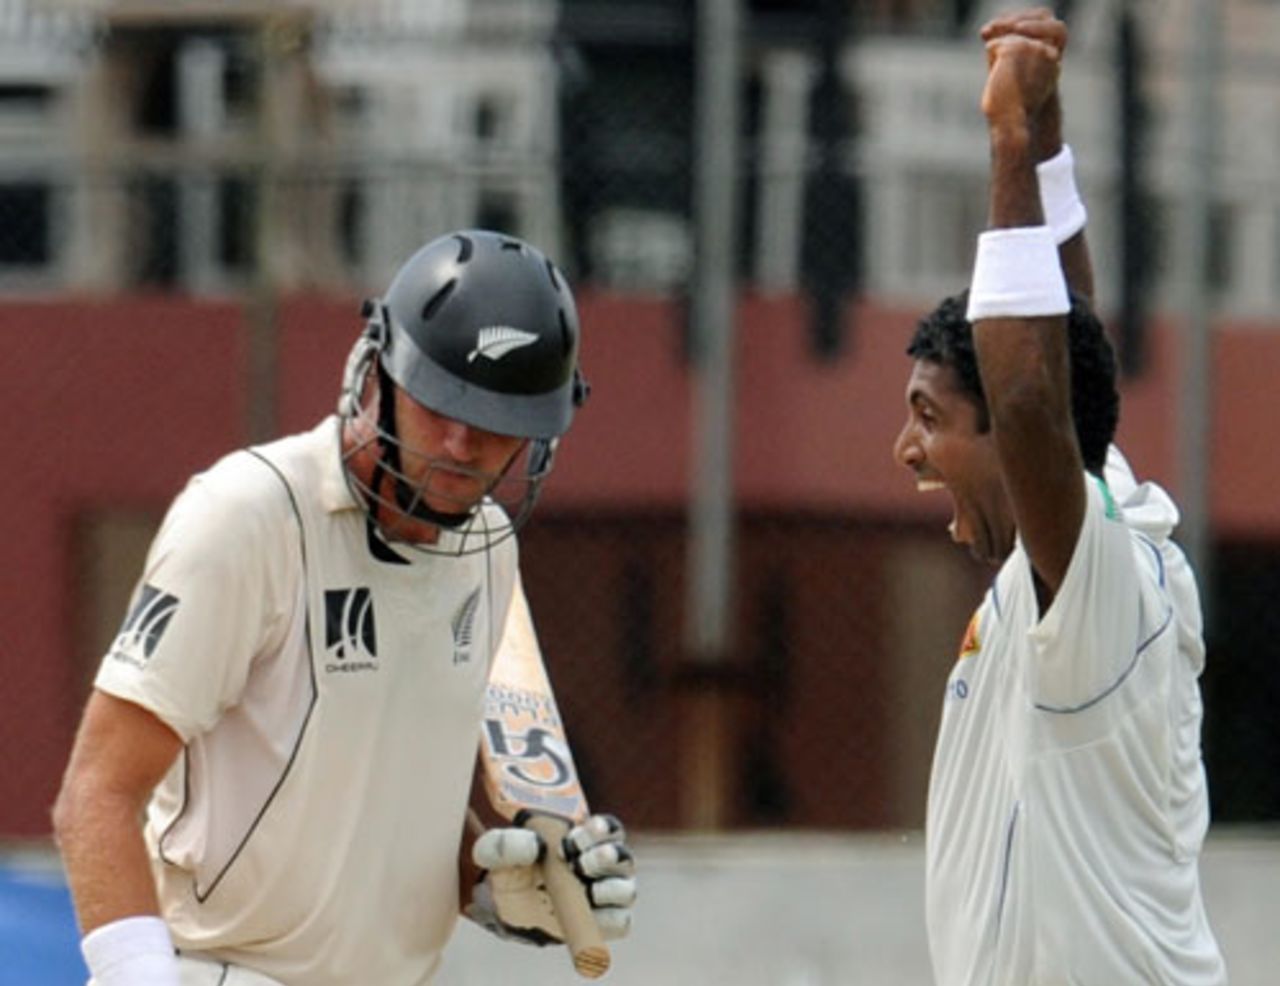 Contrasting emotions: Tim McIntosh after being bowled by Dammika Prasad, Sri Lanka v New Zealand, 2nd Test, SSC, Colombo, 4th day, August 29, 2009 